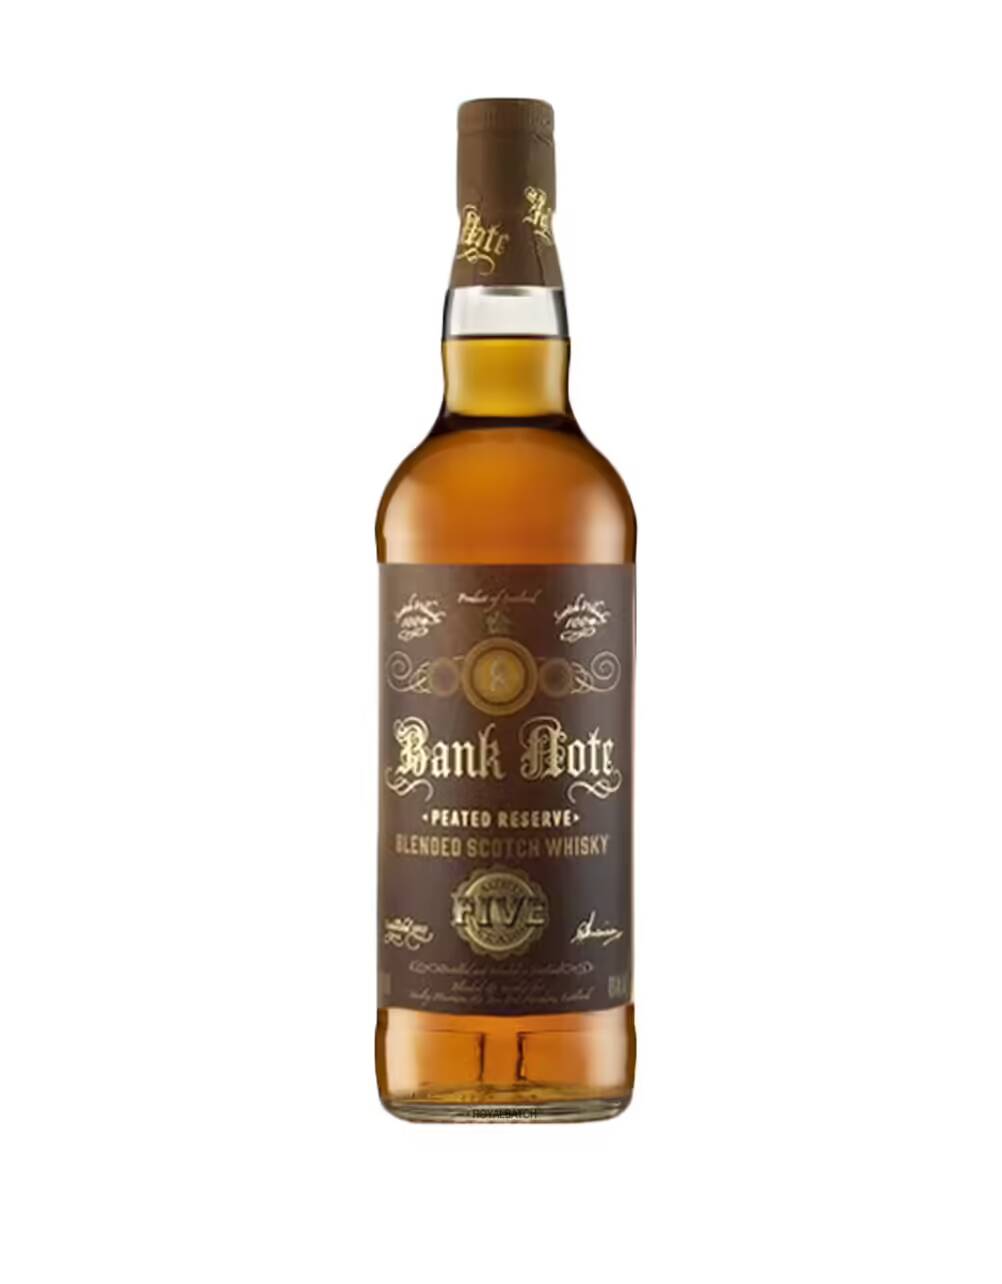 Bank Note Peated Reserve 5 Year Old Scotch Whisky